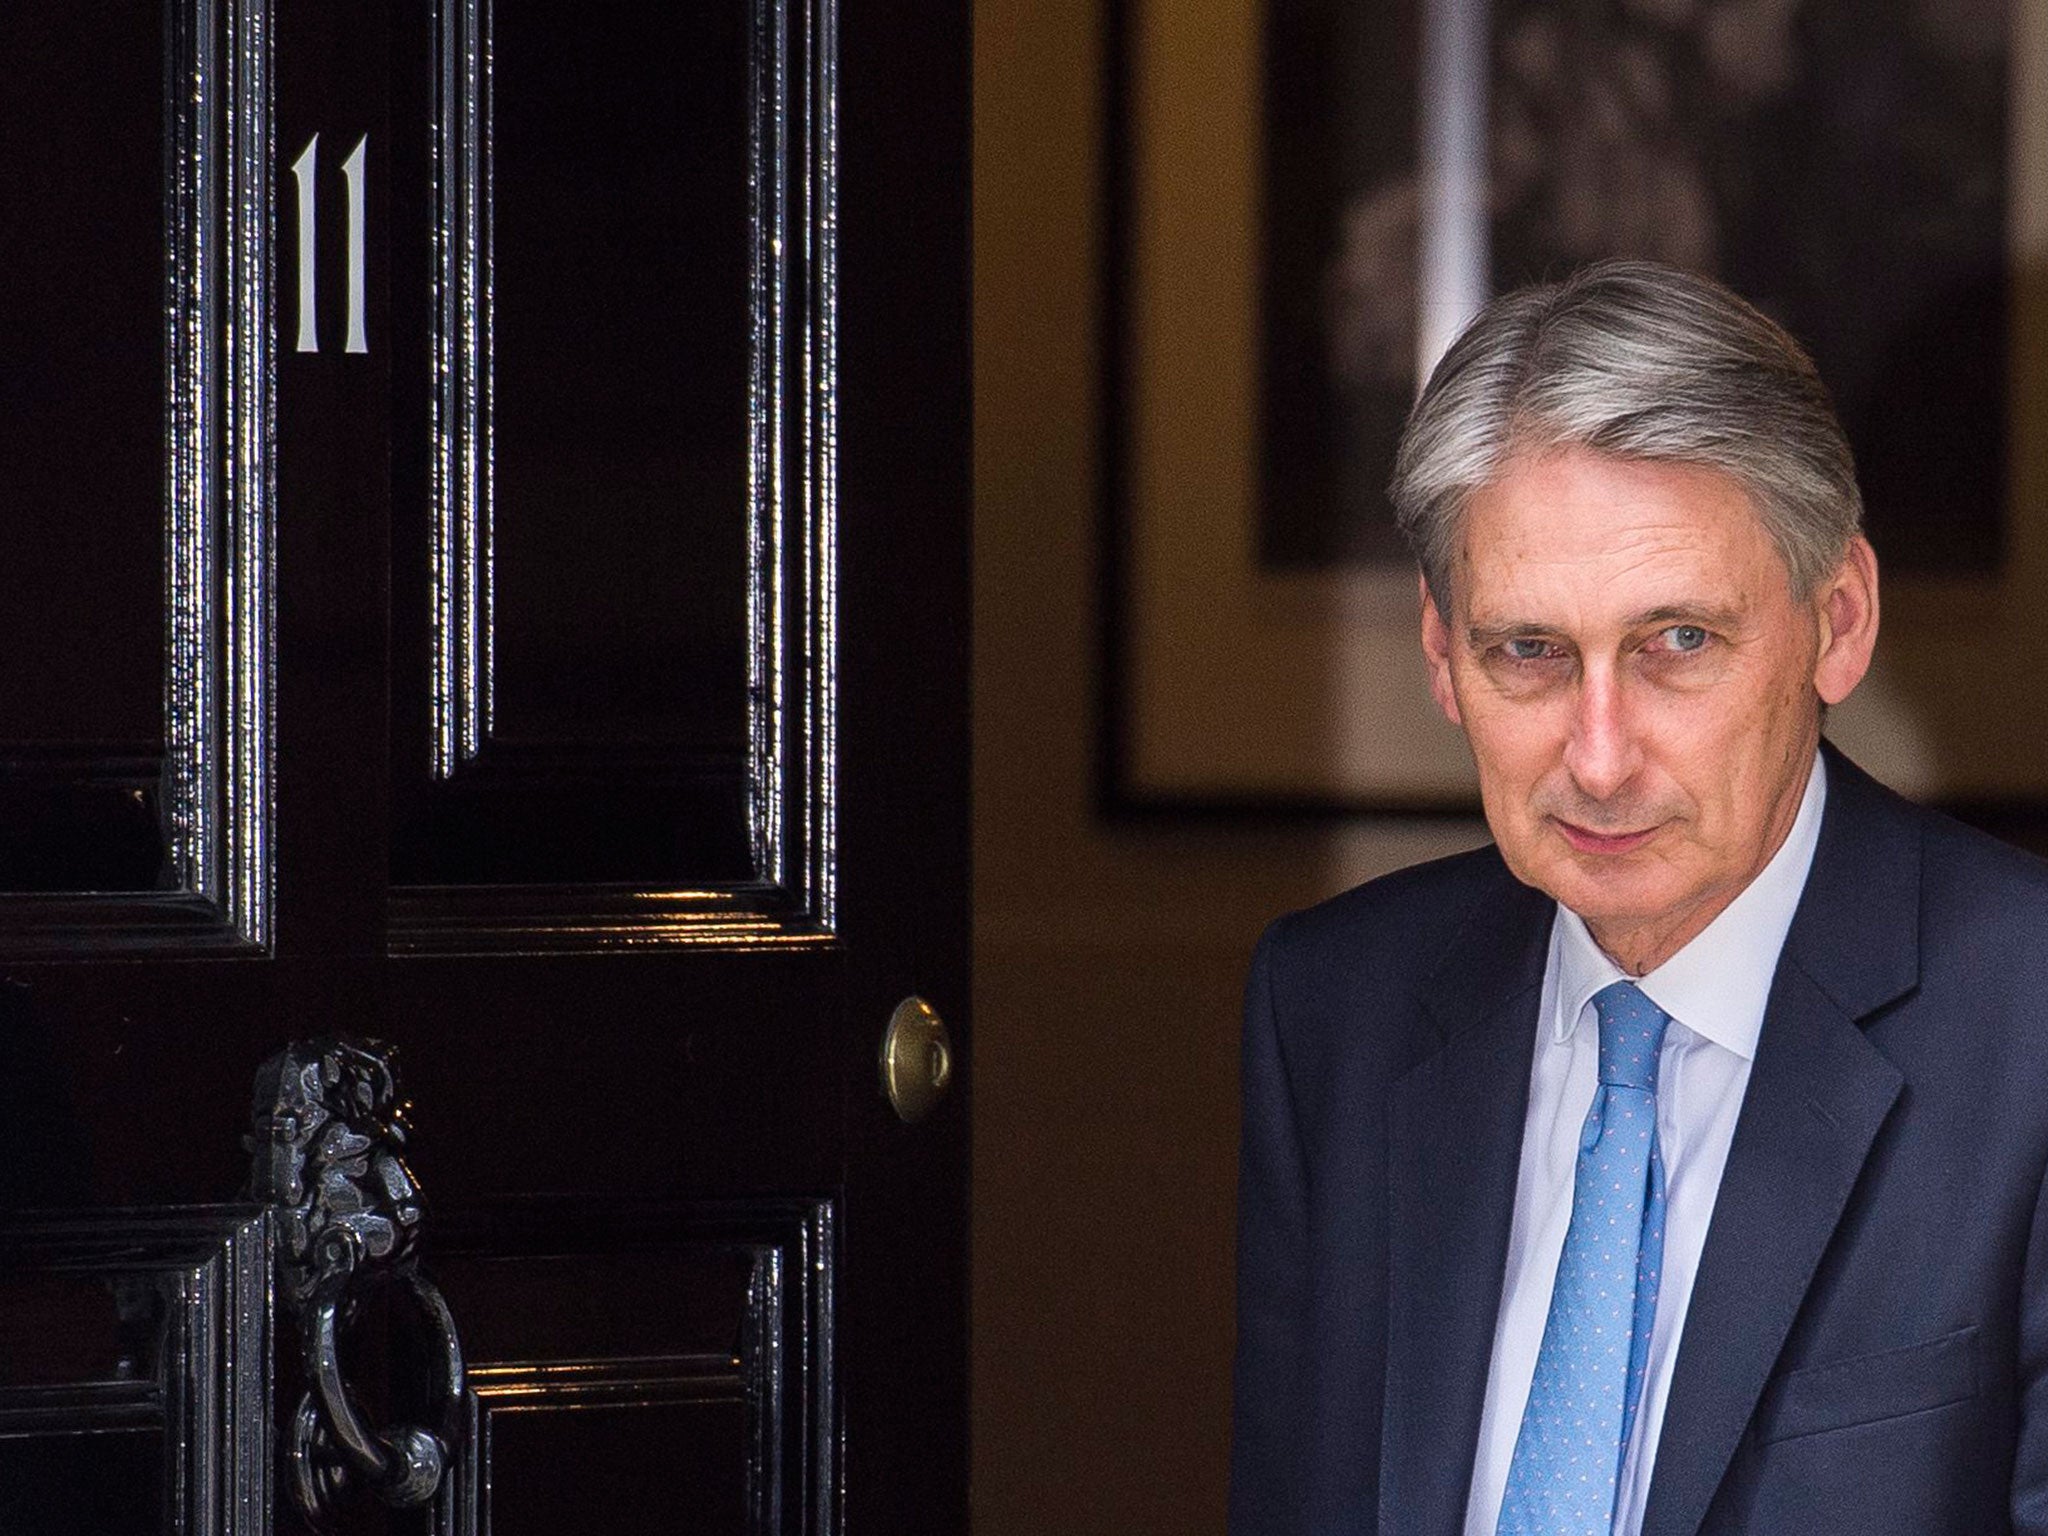 This was Philip Hammond's first meeting with financial leaders as Chancellor